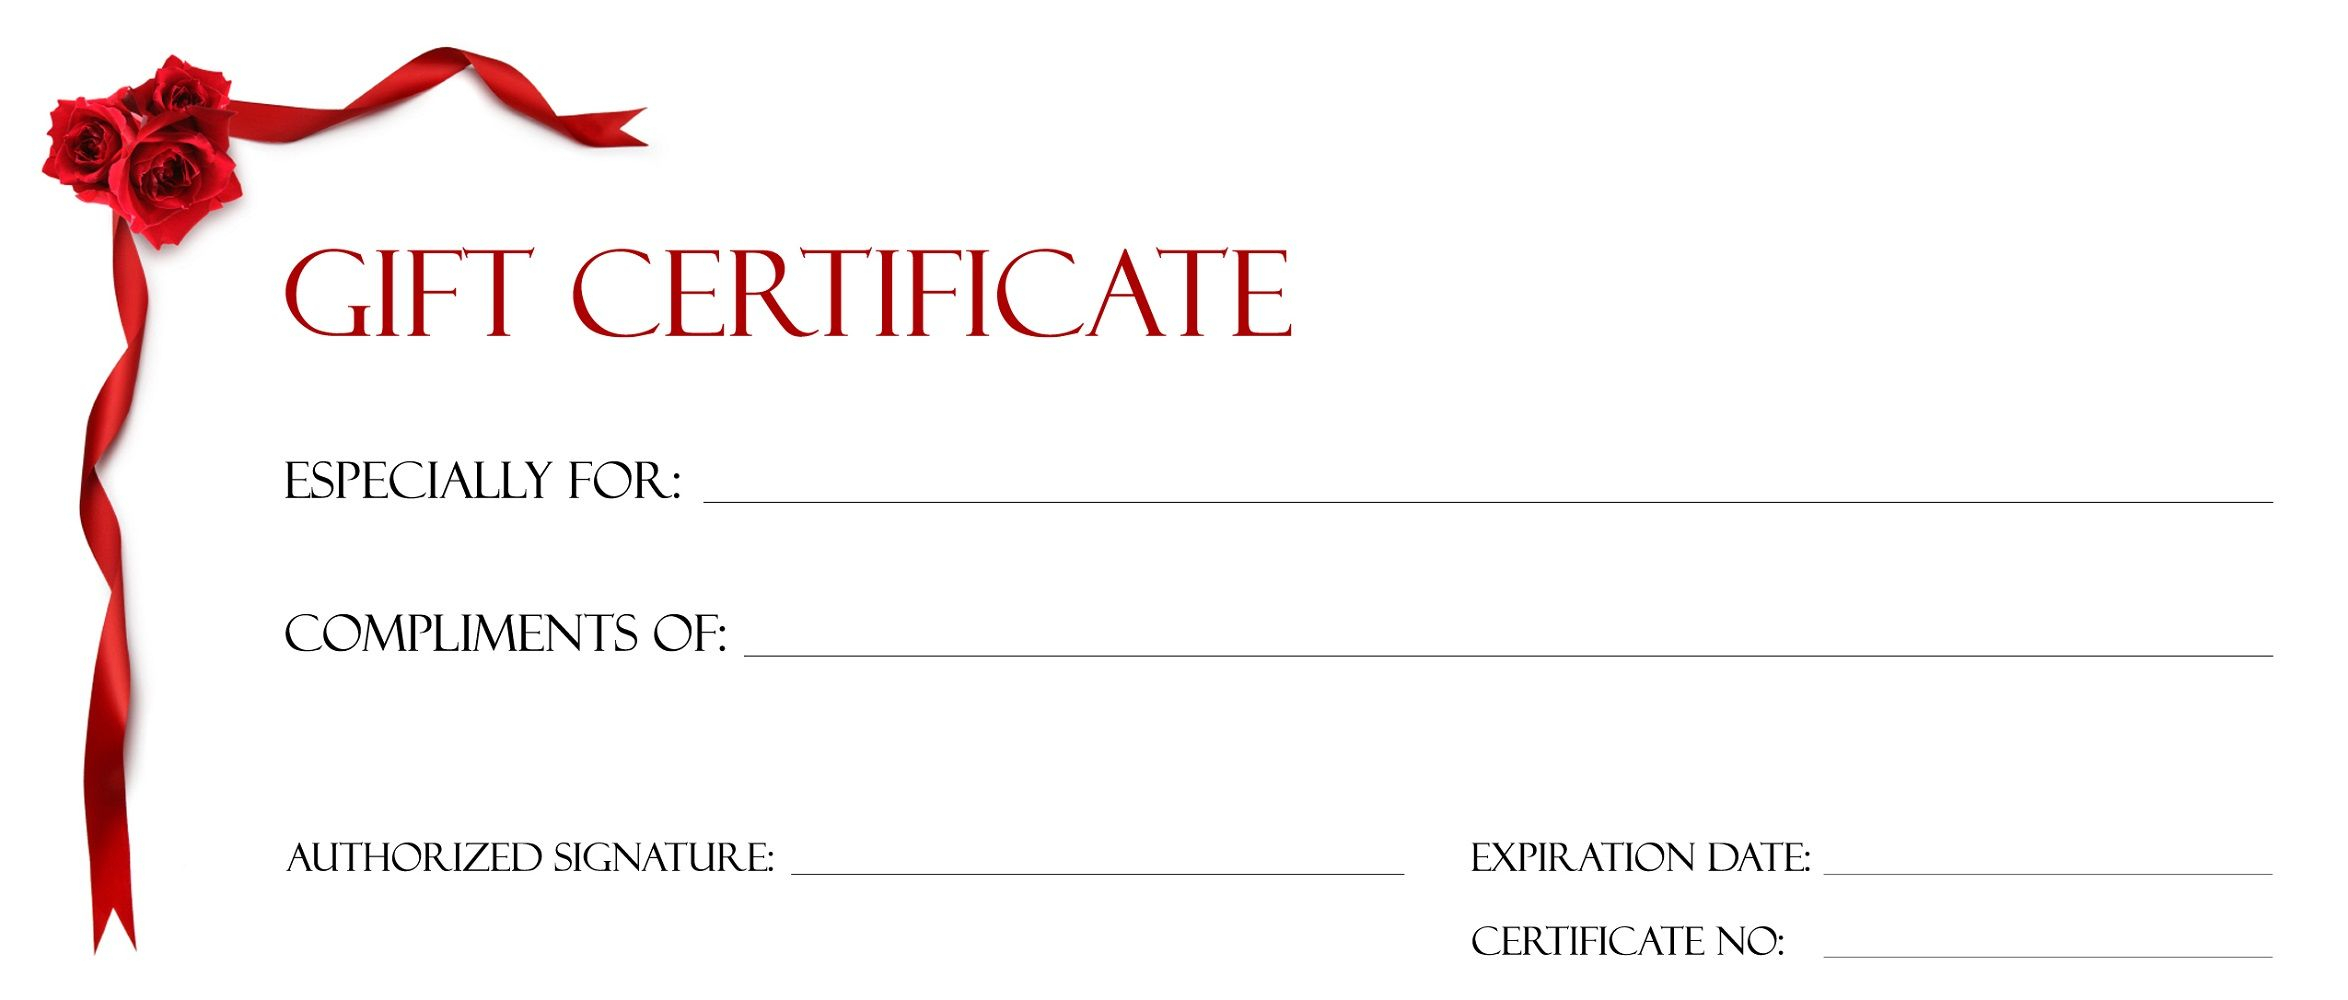 Gift Certificate Templates To Print | Gift Certificate Regarding Gift Certificate Template Publisher